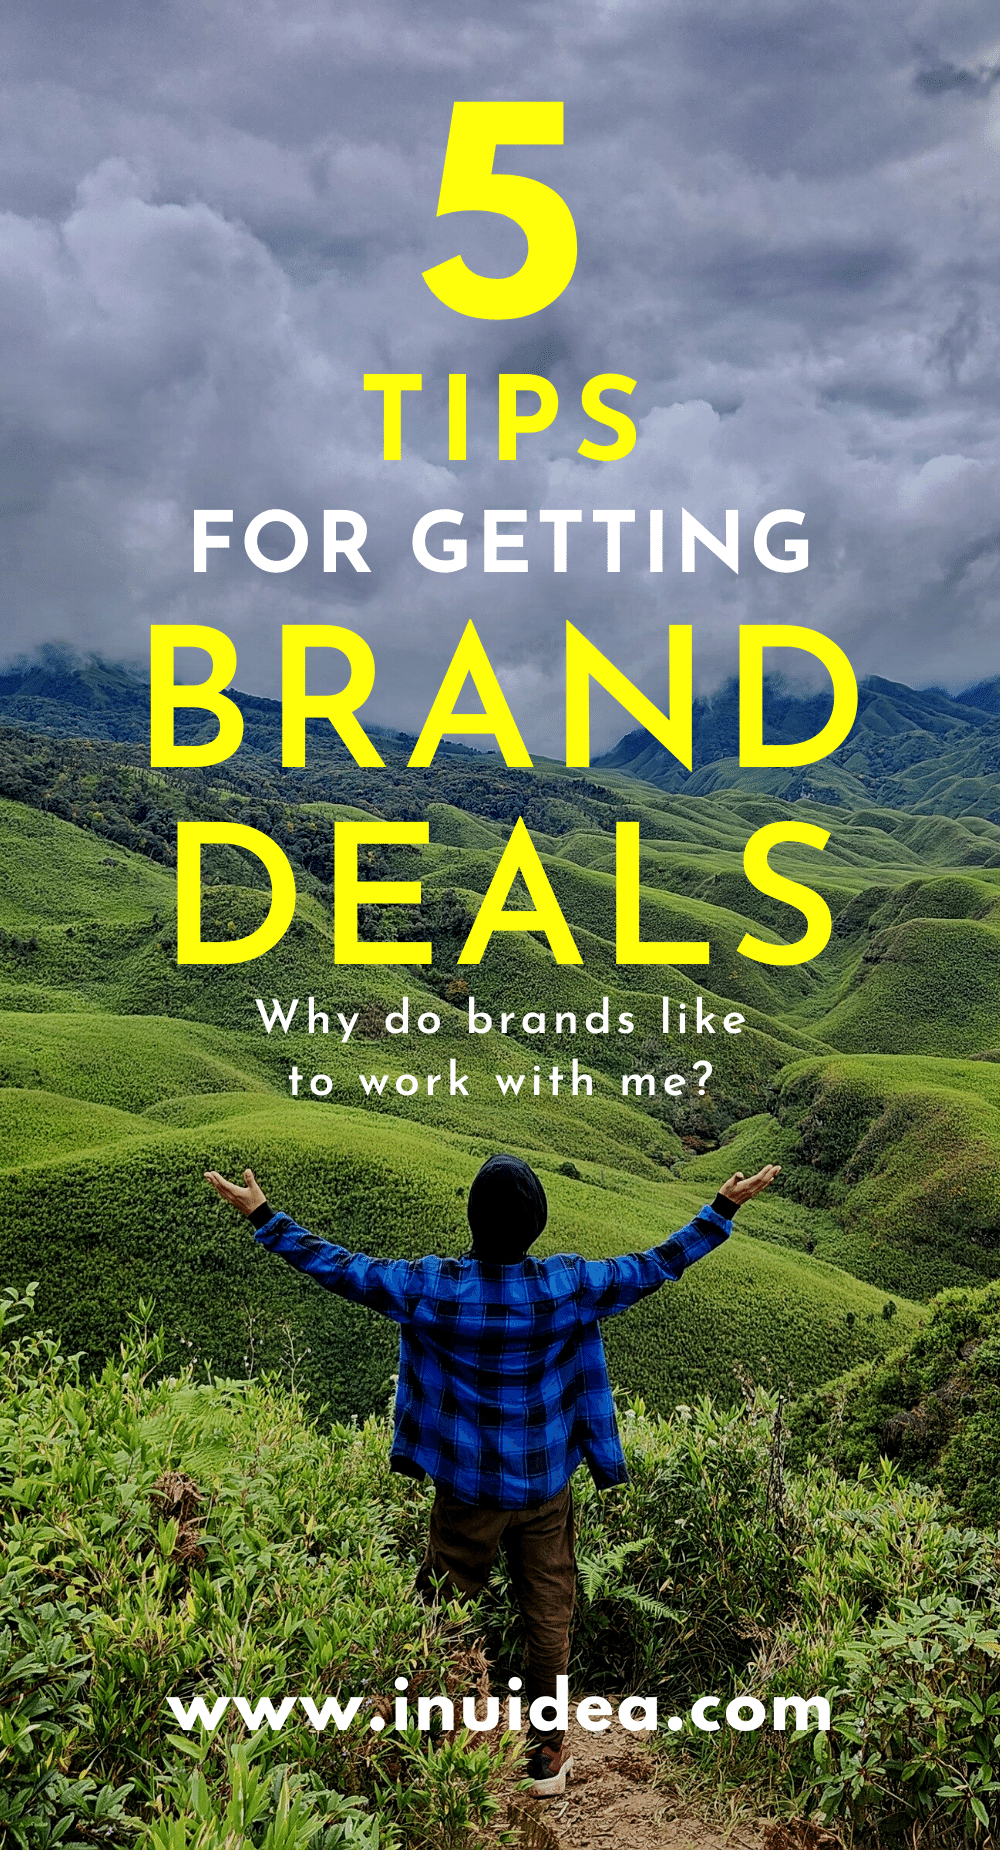 The Top 5 Tips for Getting Brand Deals and Sponsorship opportunities - Why do brands like to work with me?